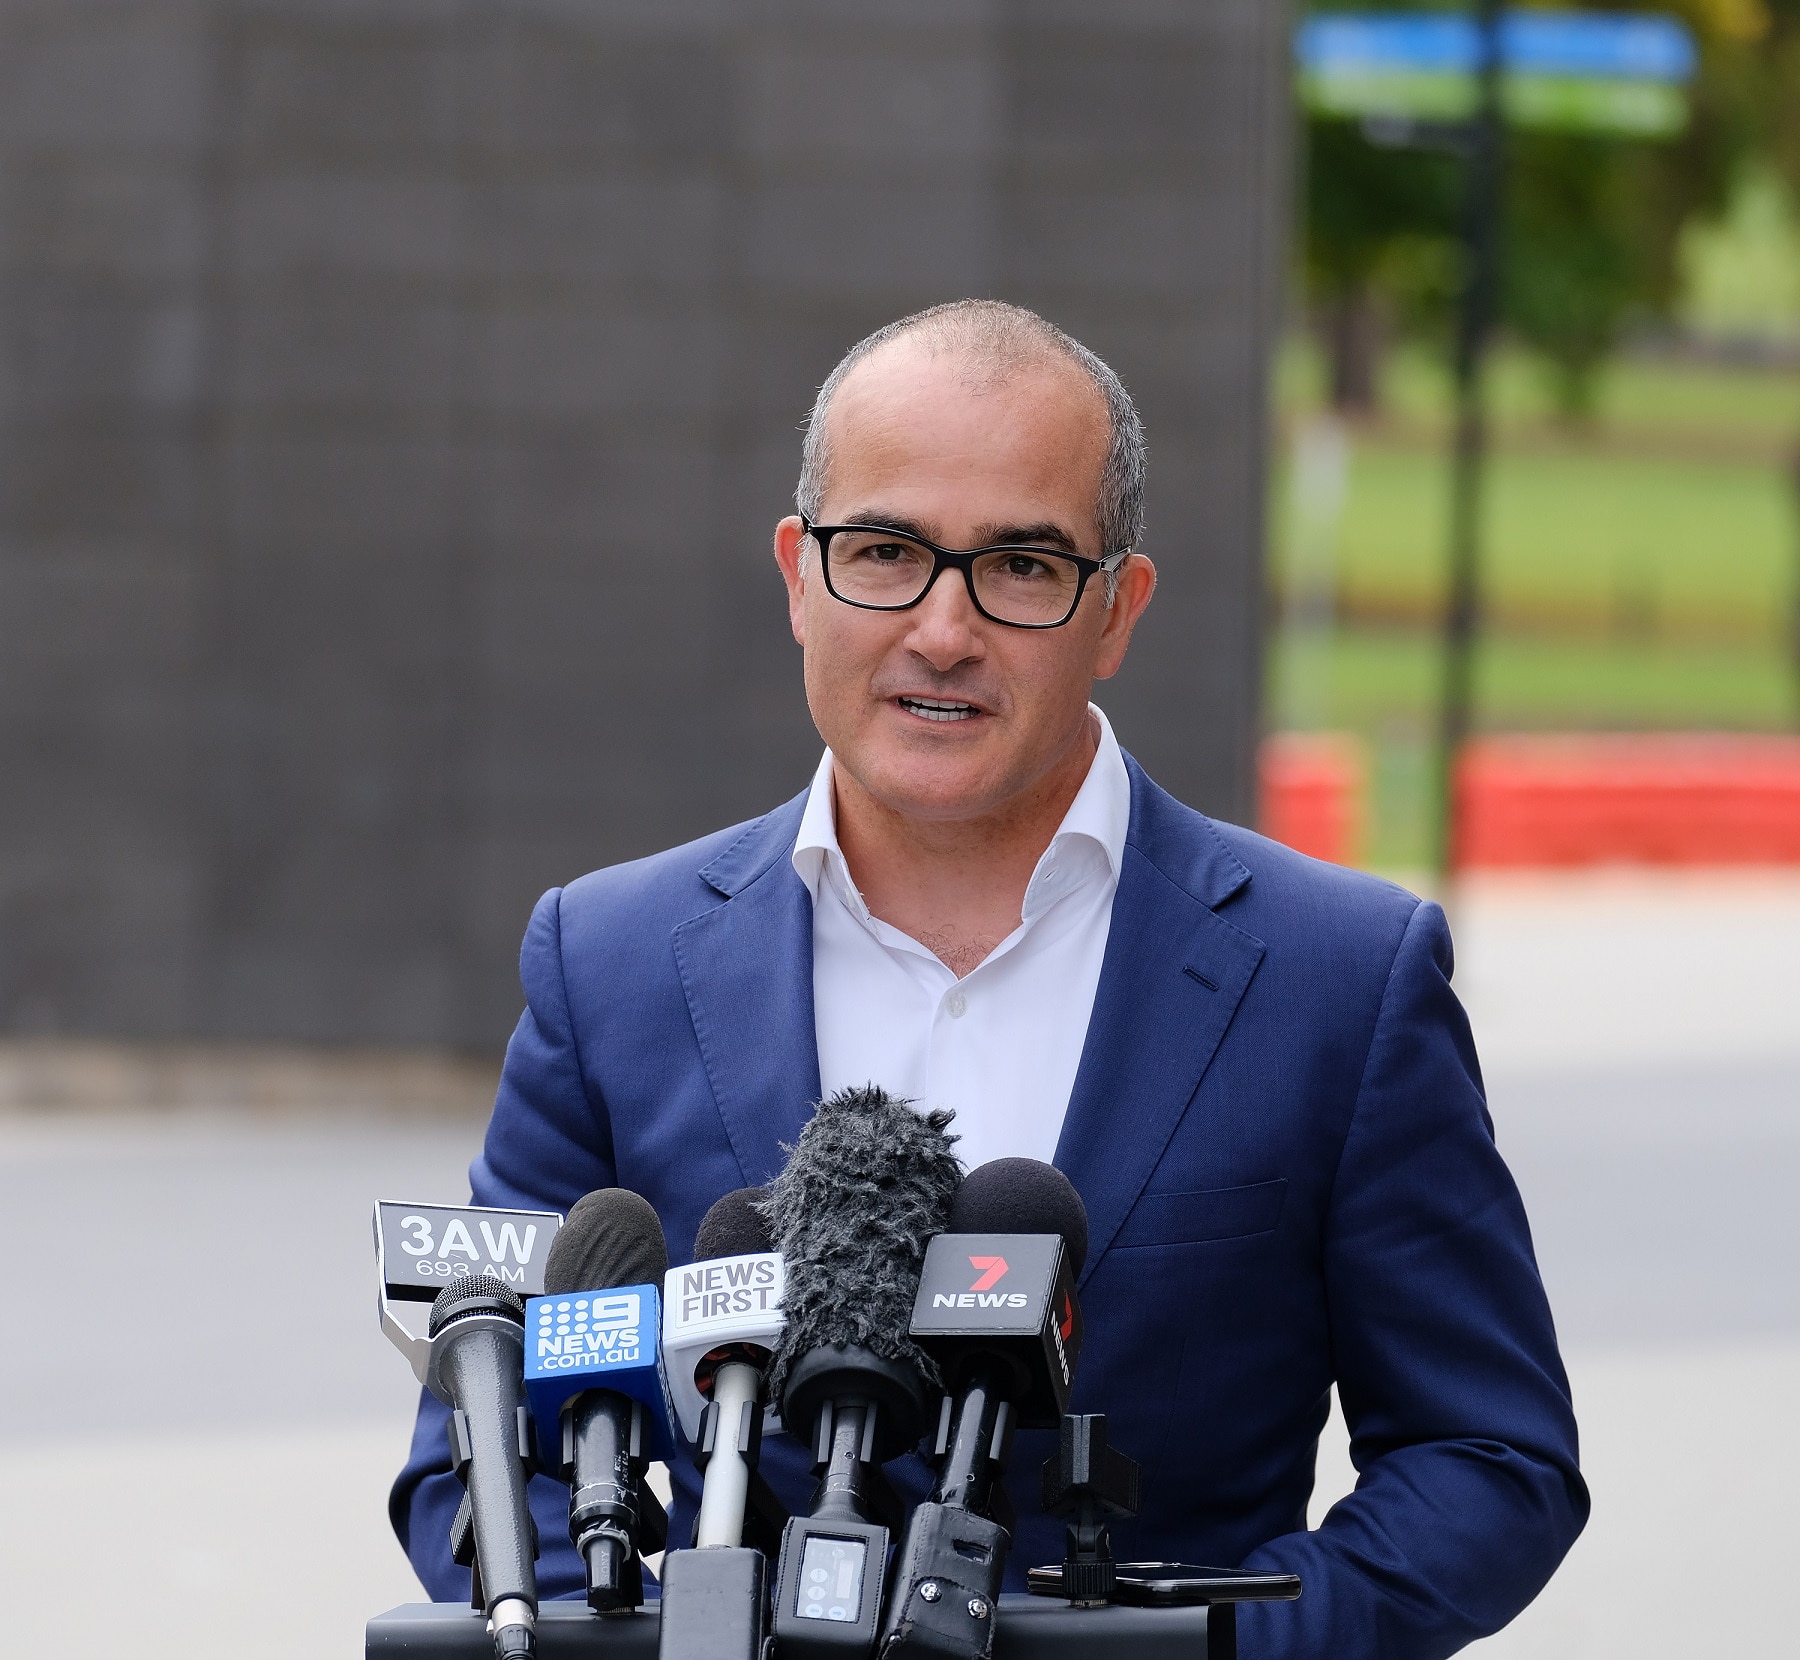 Acting Victorian Premier James Merlino speaks to the media during the announcement of the next round of Change Our Game Making the Call participants at the MCG in Melbourne, Tuesday, April 13, 2021. (AAP Image/Luis Ascui) NO ARCHIVING